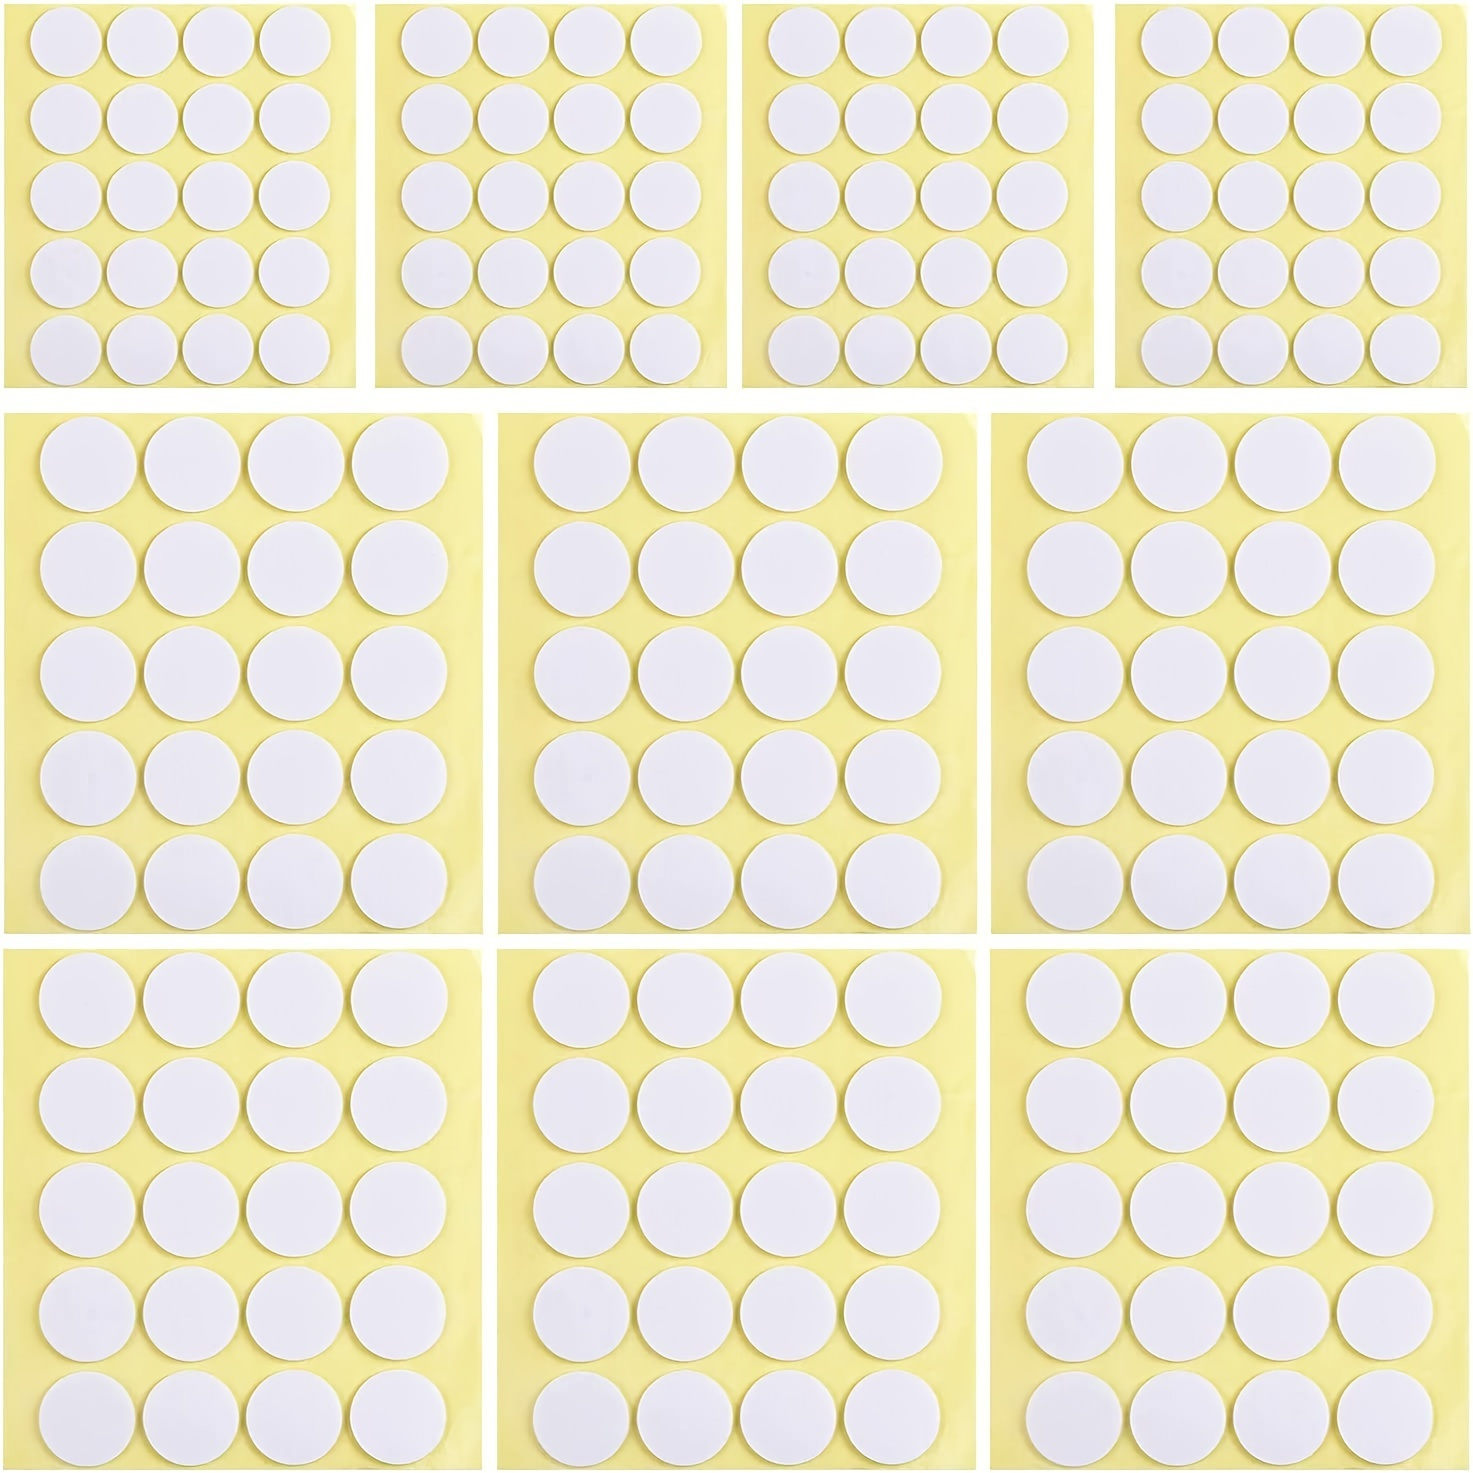 400pcs Candle Wick Stickers Heat Resistance Candle Making